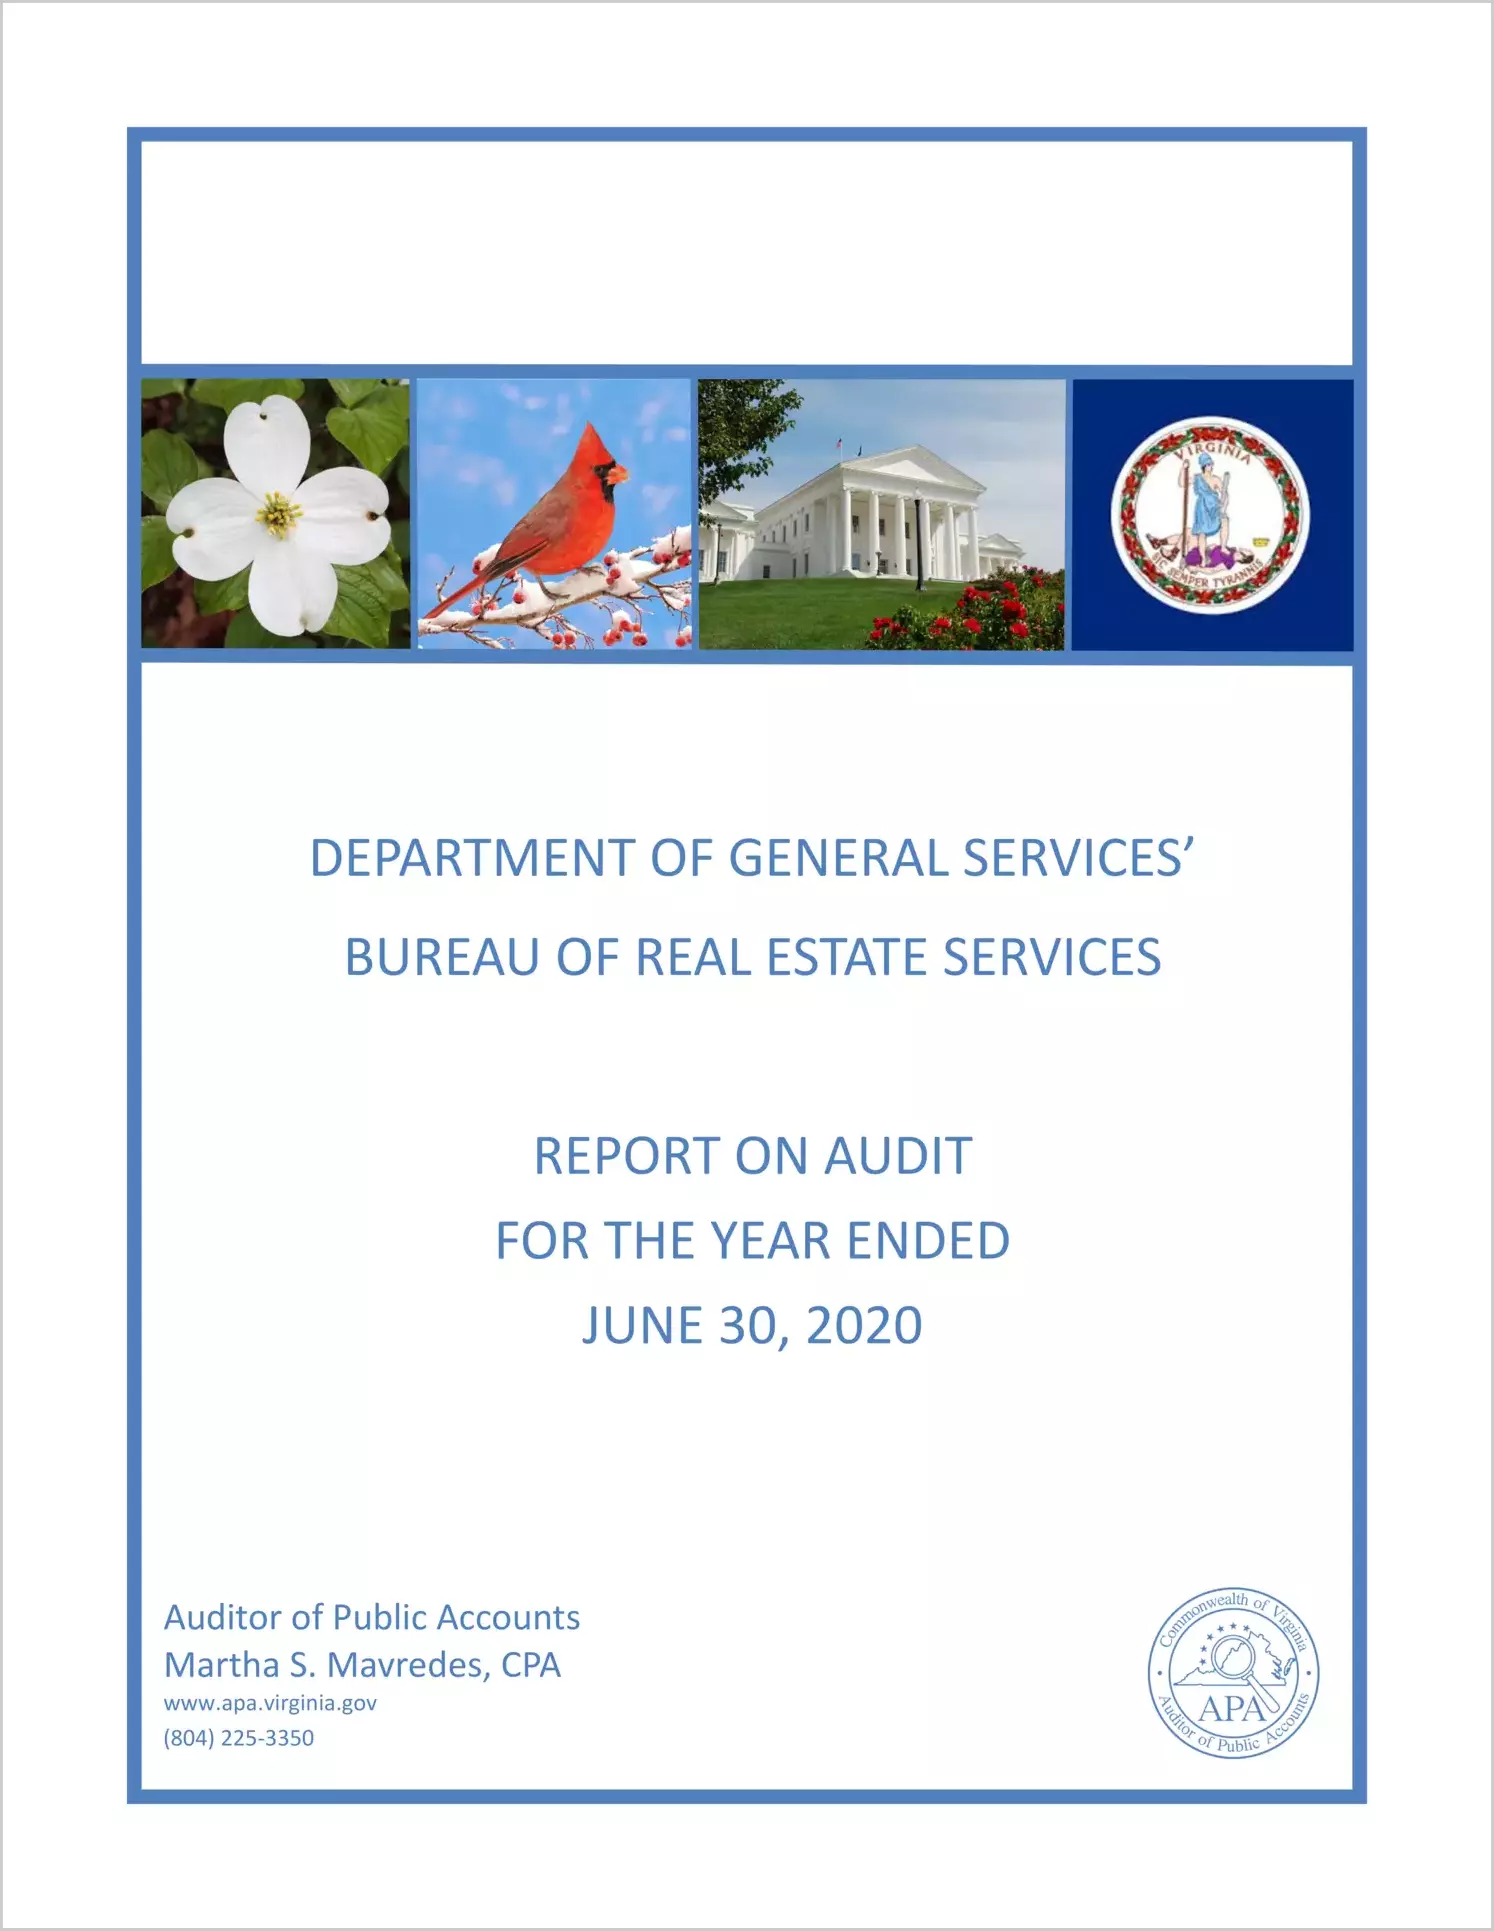 Department of General Service's Bureau of Real Estate Services for the year ended June 30, 2020